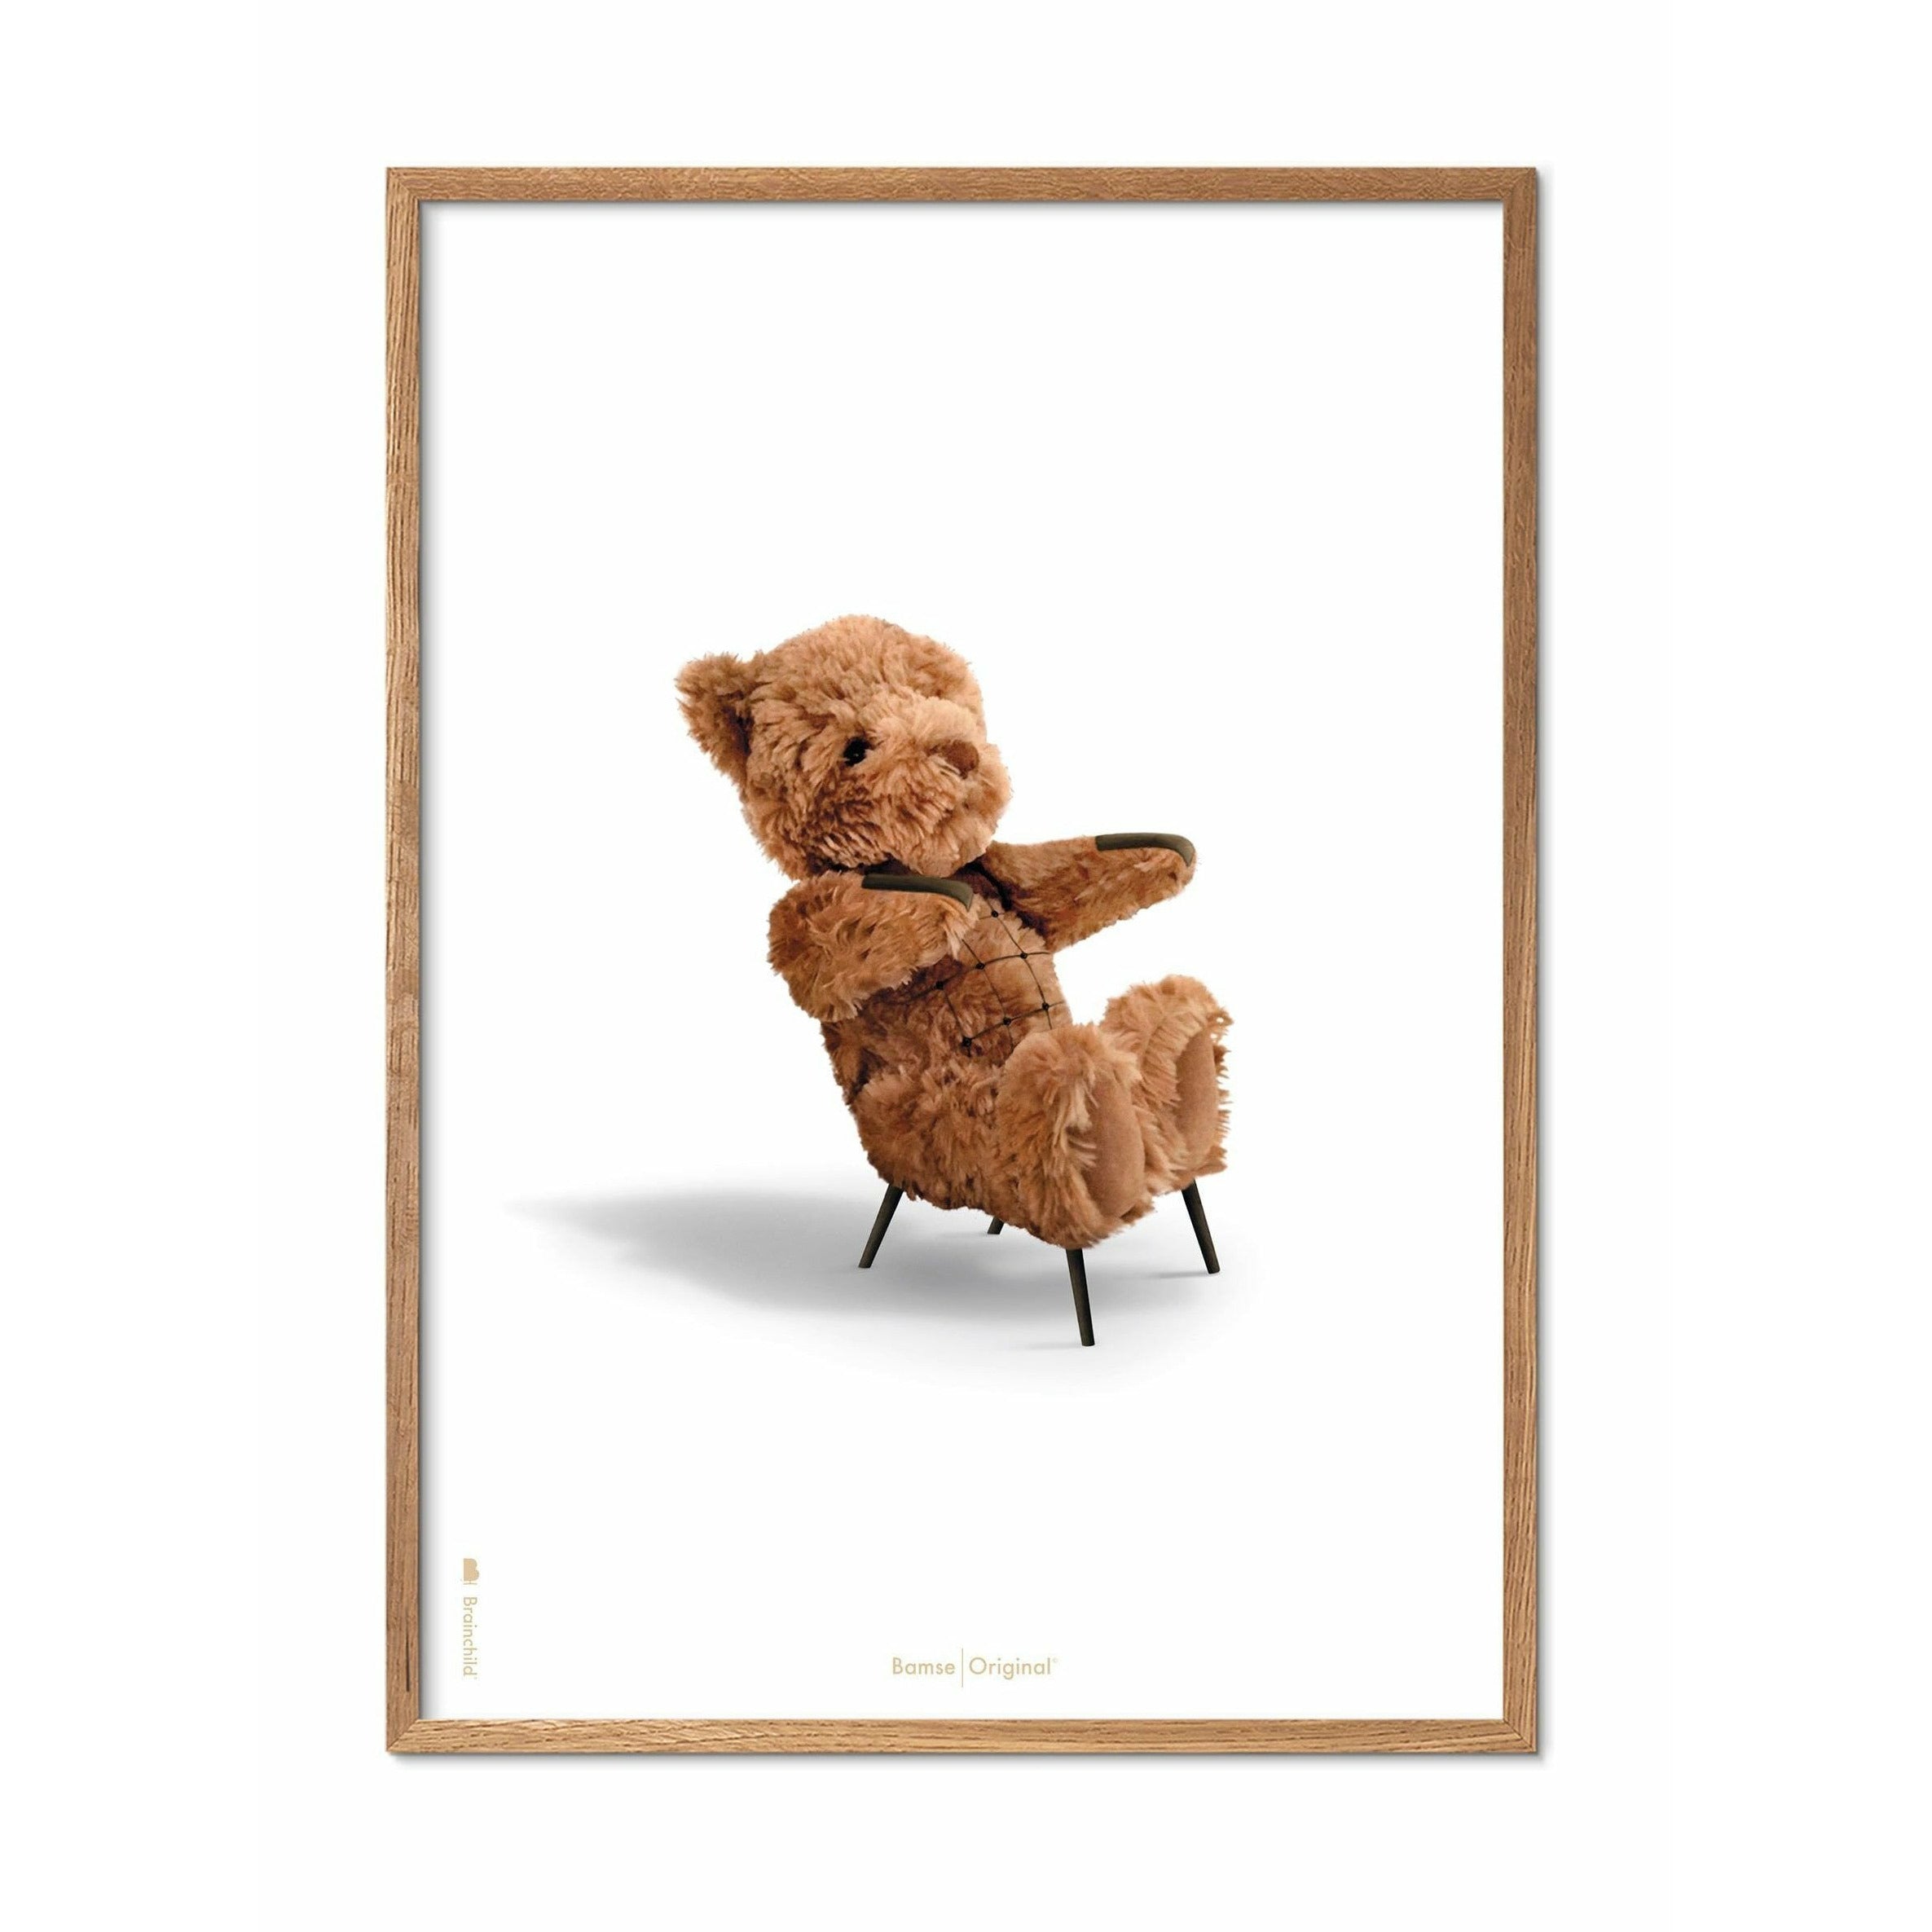 Brainchild Teddy Bear Classic Poster, Frame Made Of Light Wood A5, White Background